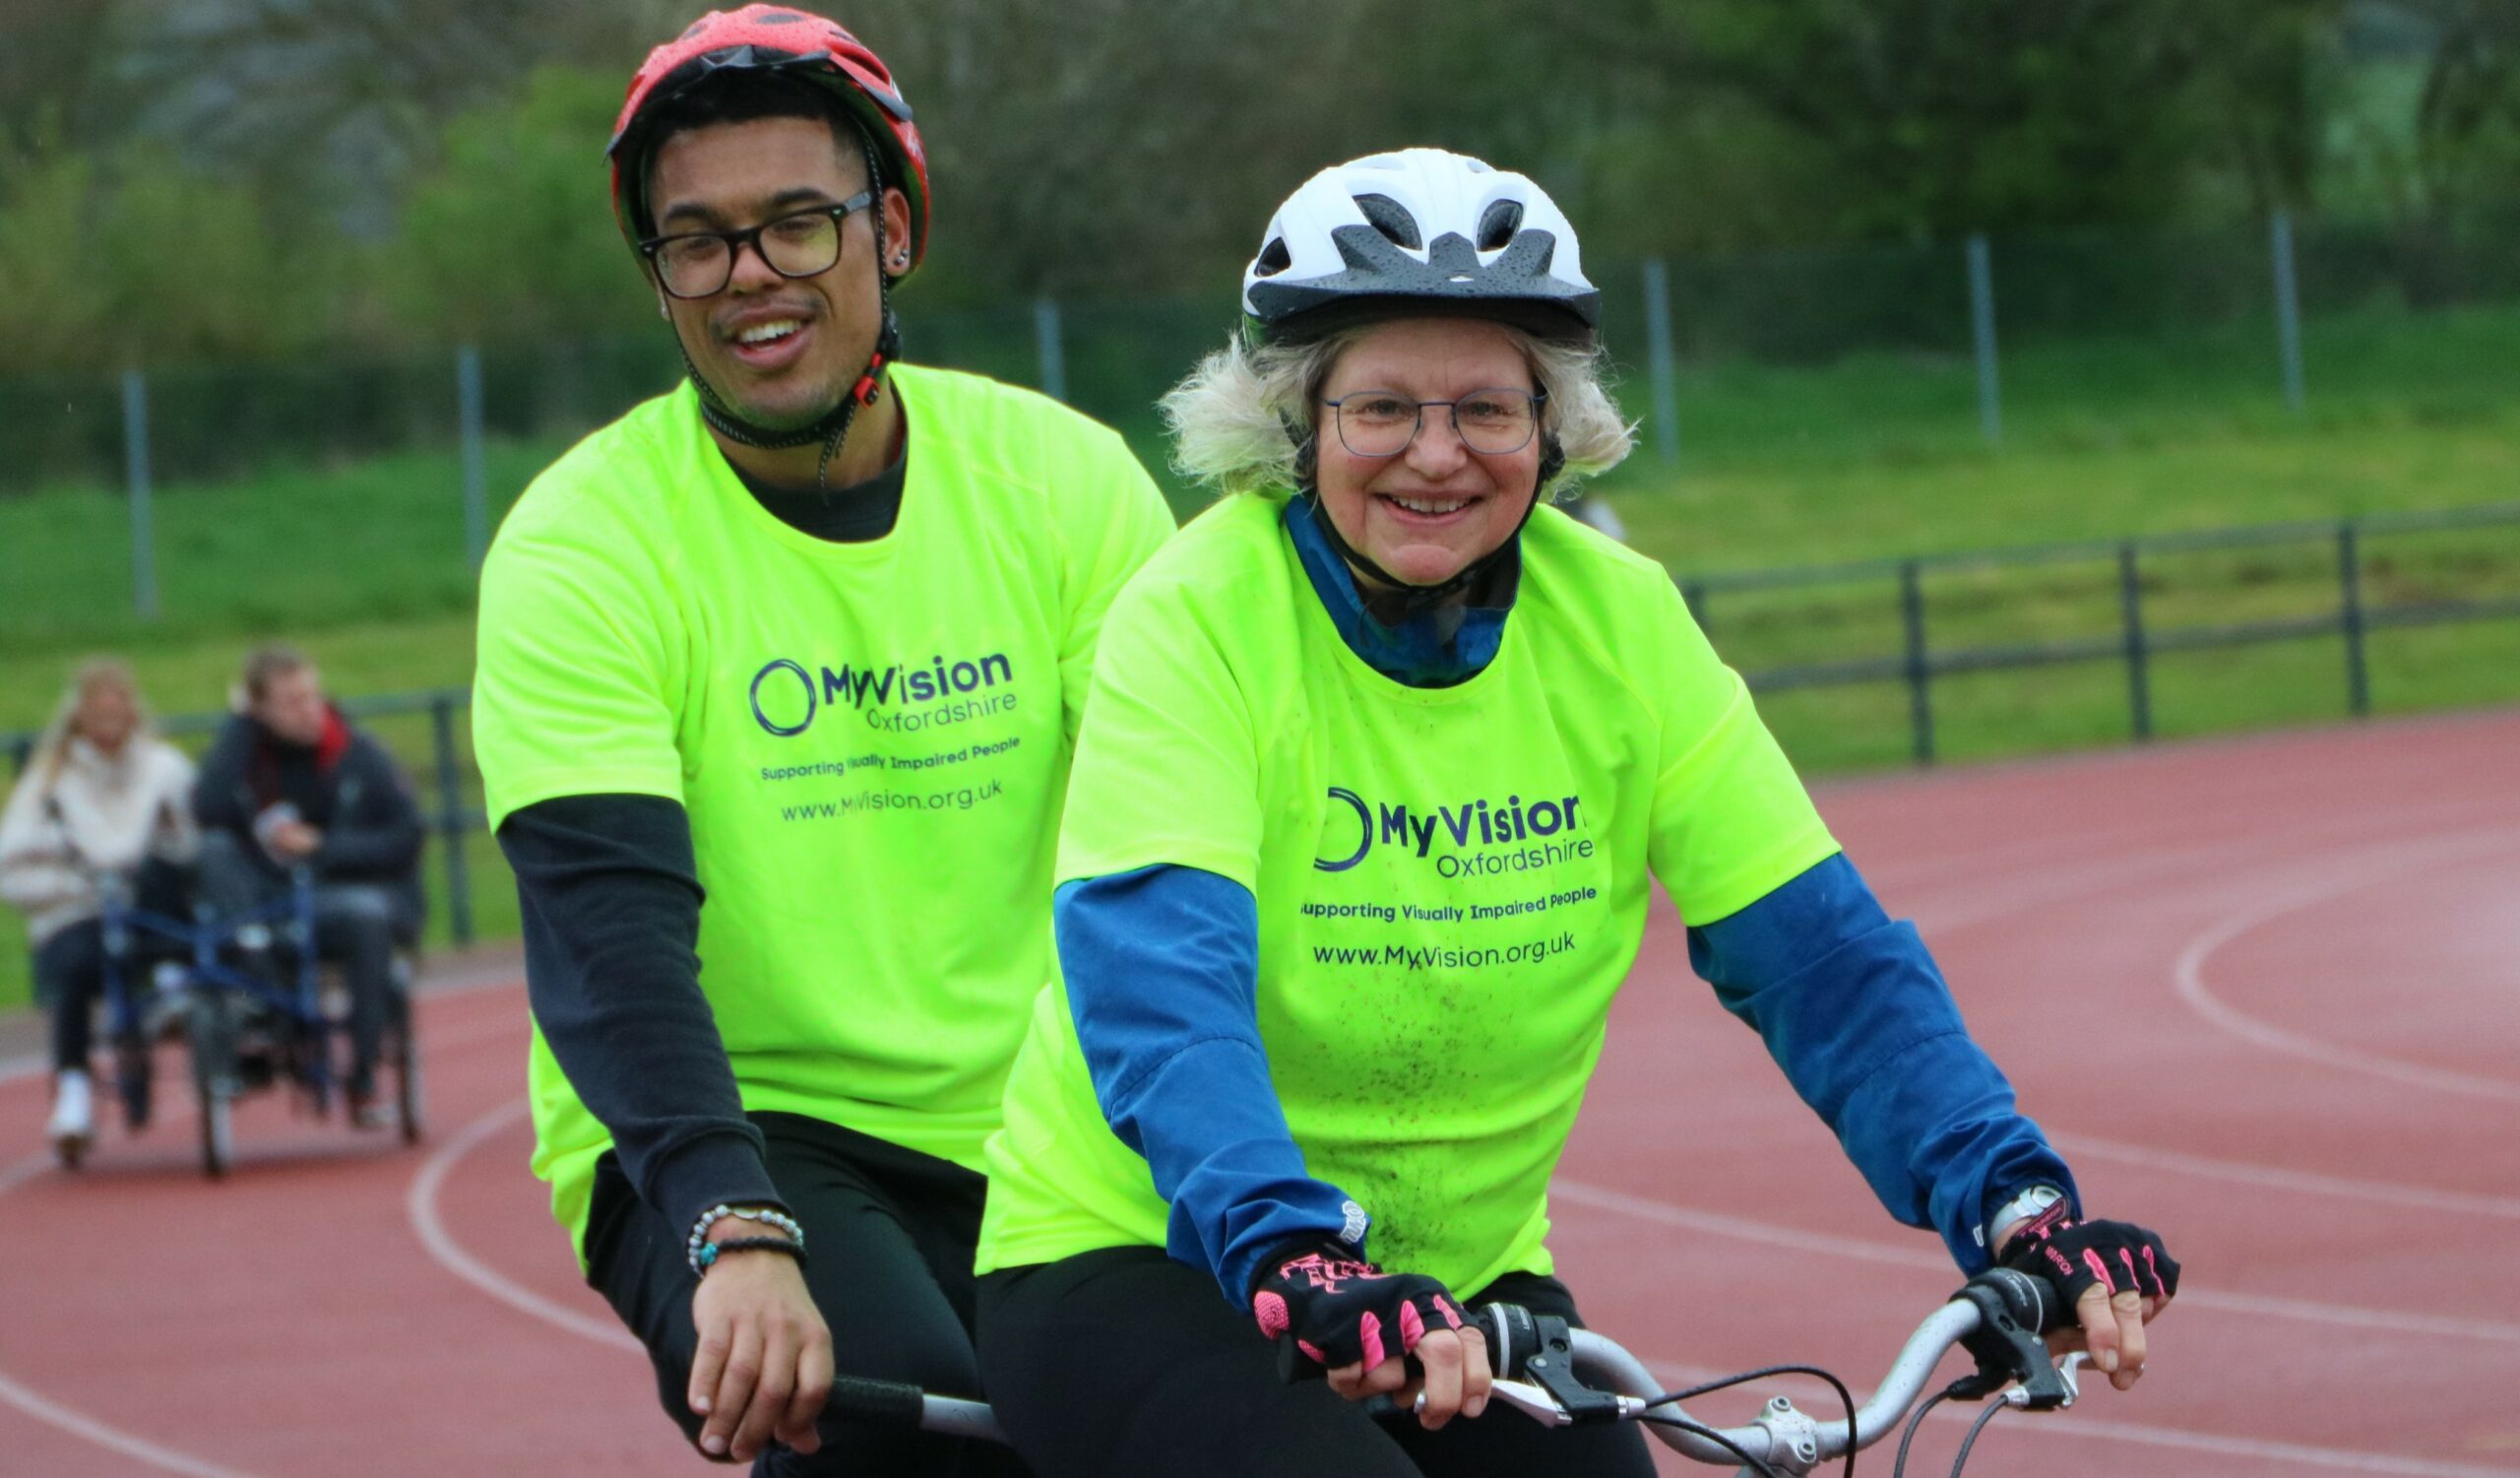 A photo of two people wearing MyVision t-shirts, riding a tandem bike and smiling at the camera